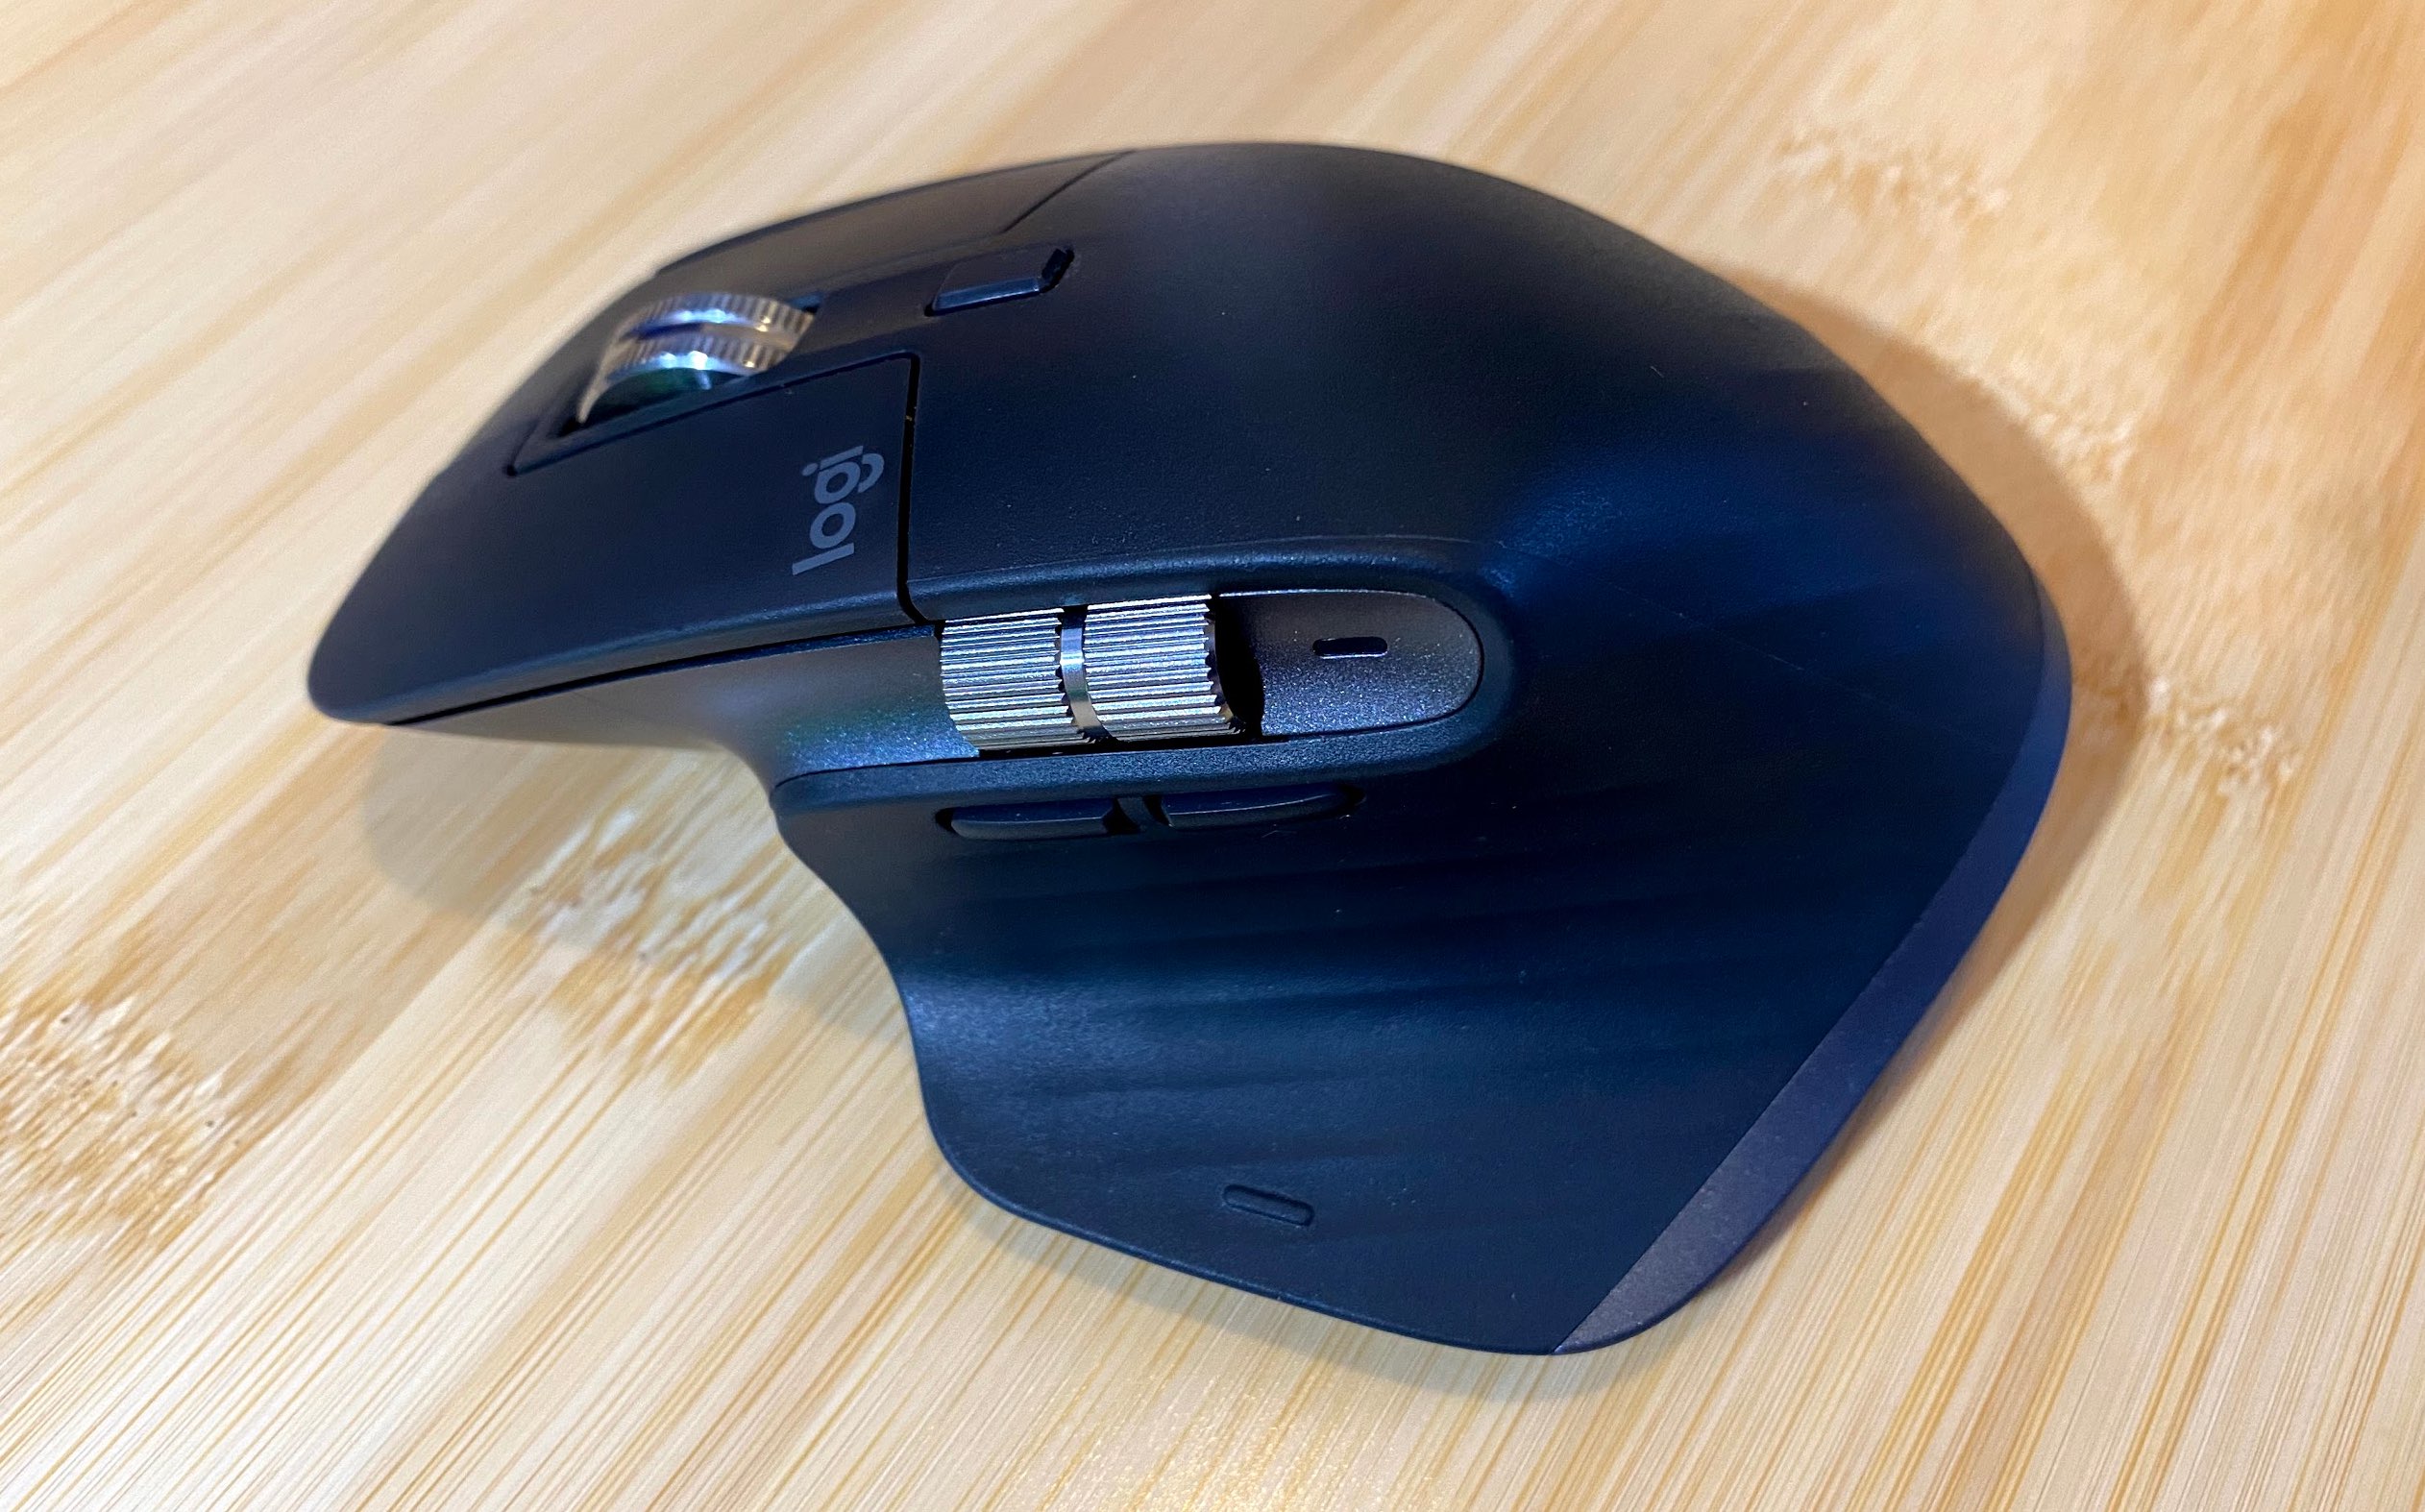 mx master 3 mouse